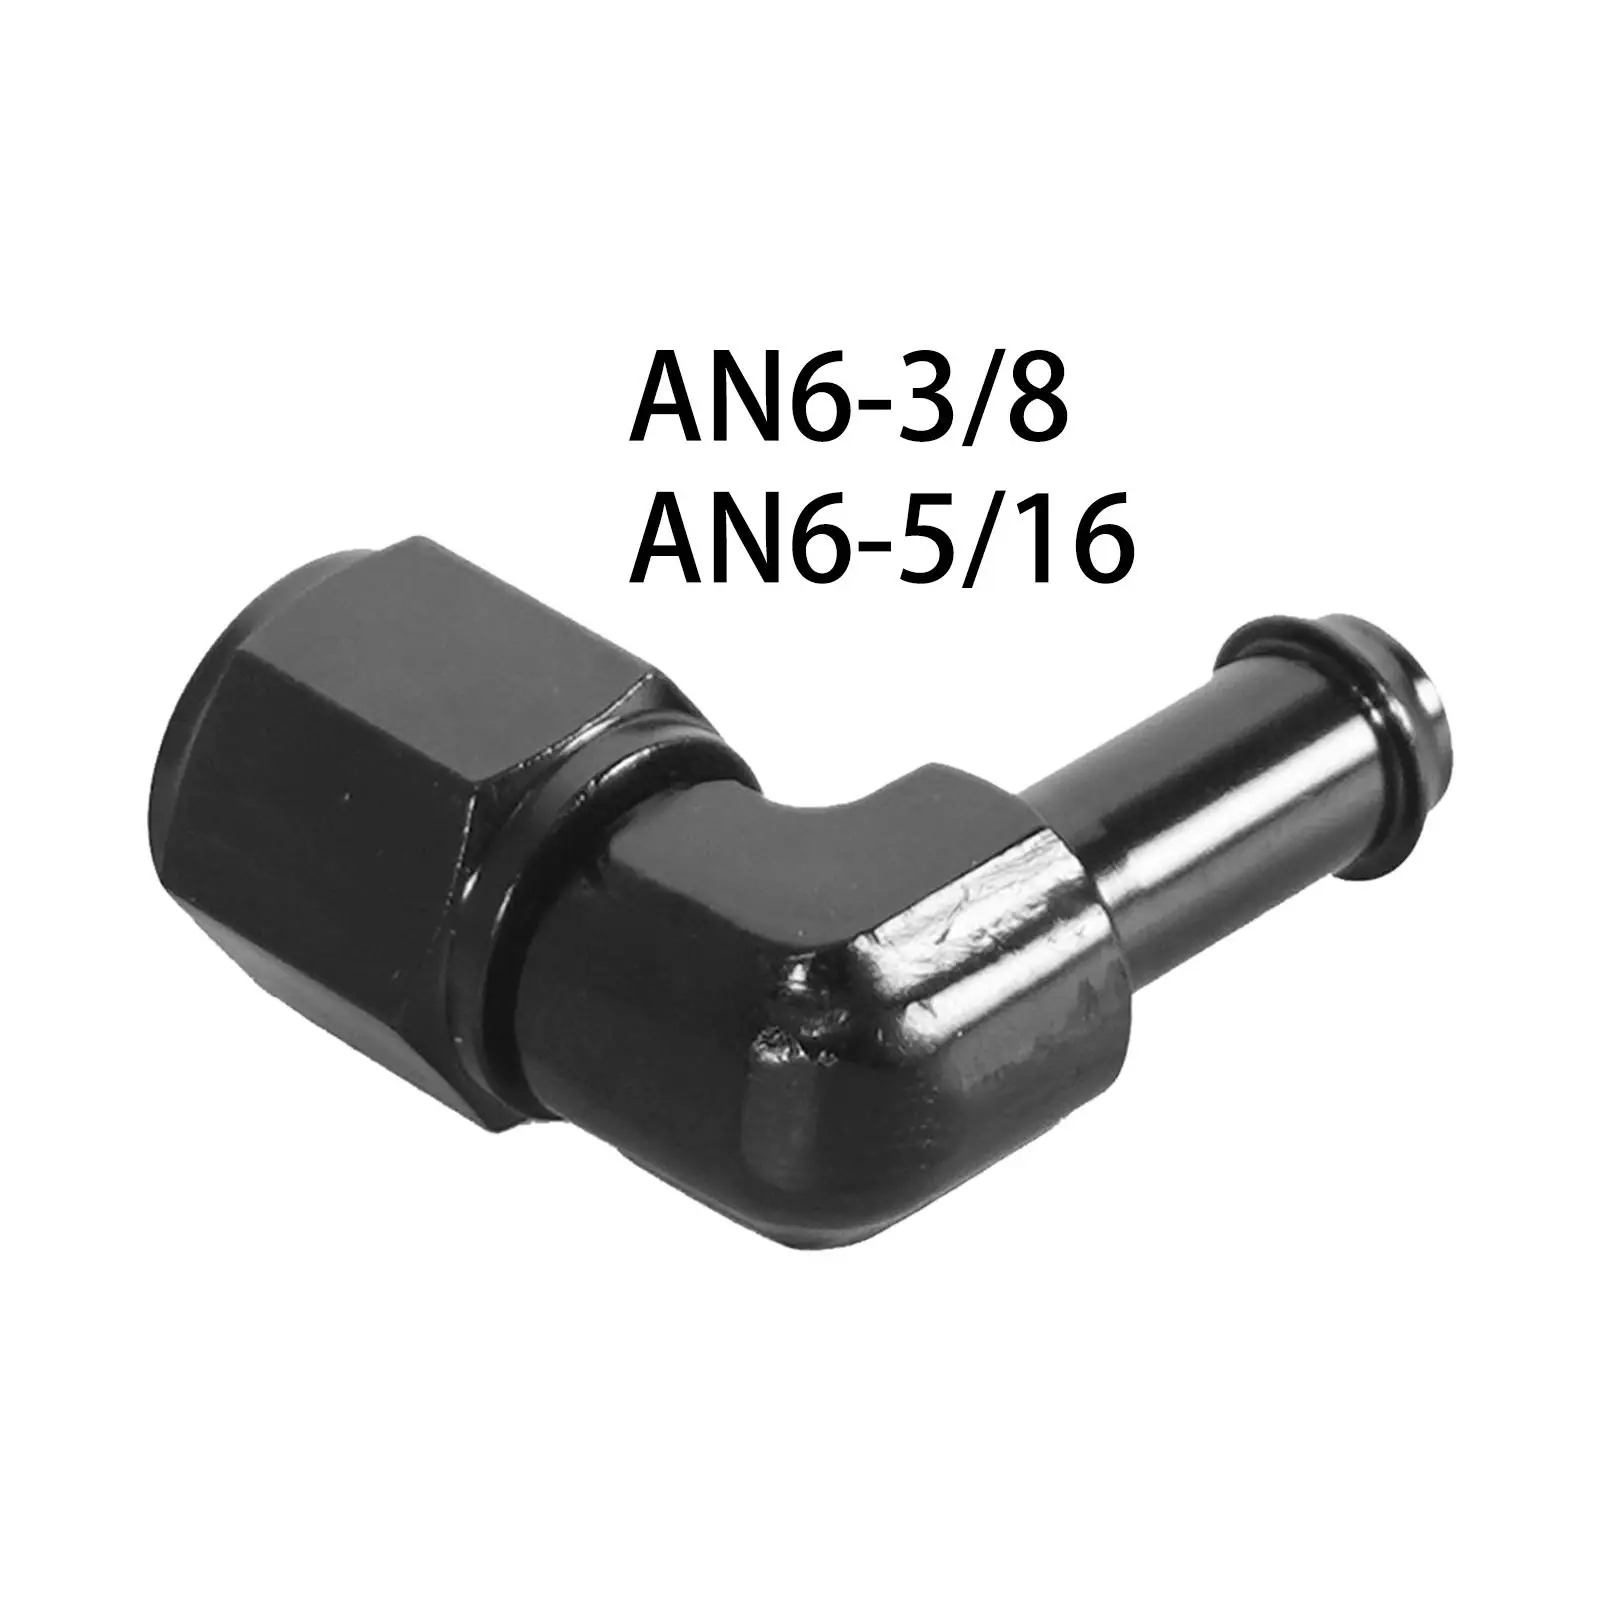 Aluminum Alloy 6AN Female Swivel Coupler 90 Degree Hose Barb Adapter Black Anodized Finish Easy to Install Accessories Component